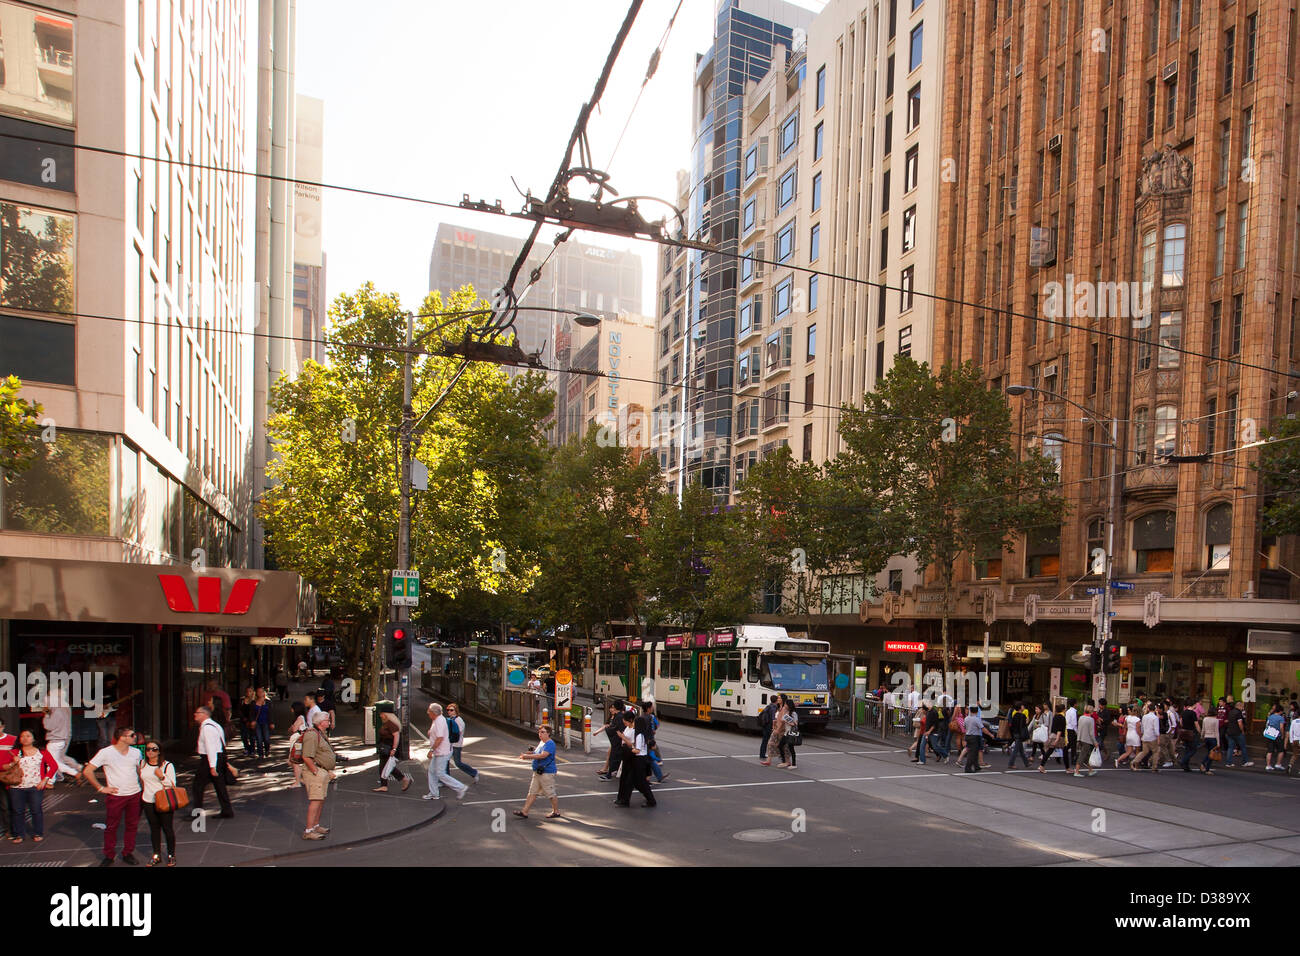 Australia, Melbourne city street people walking and shopping Stock Photo